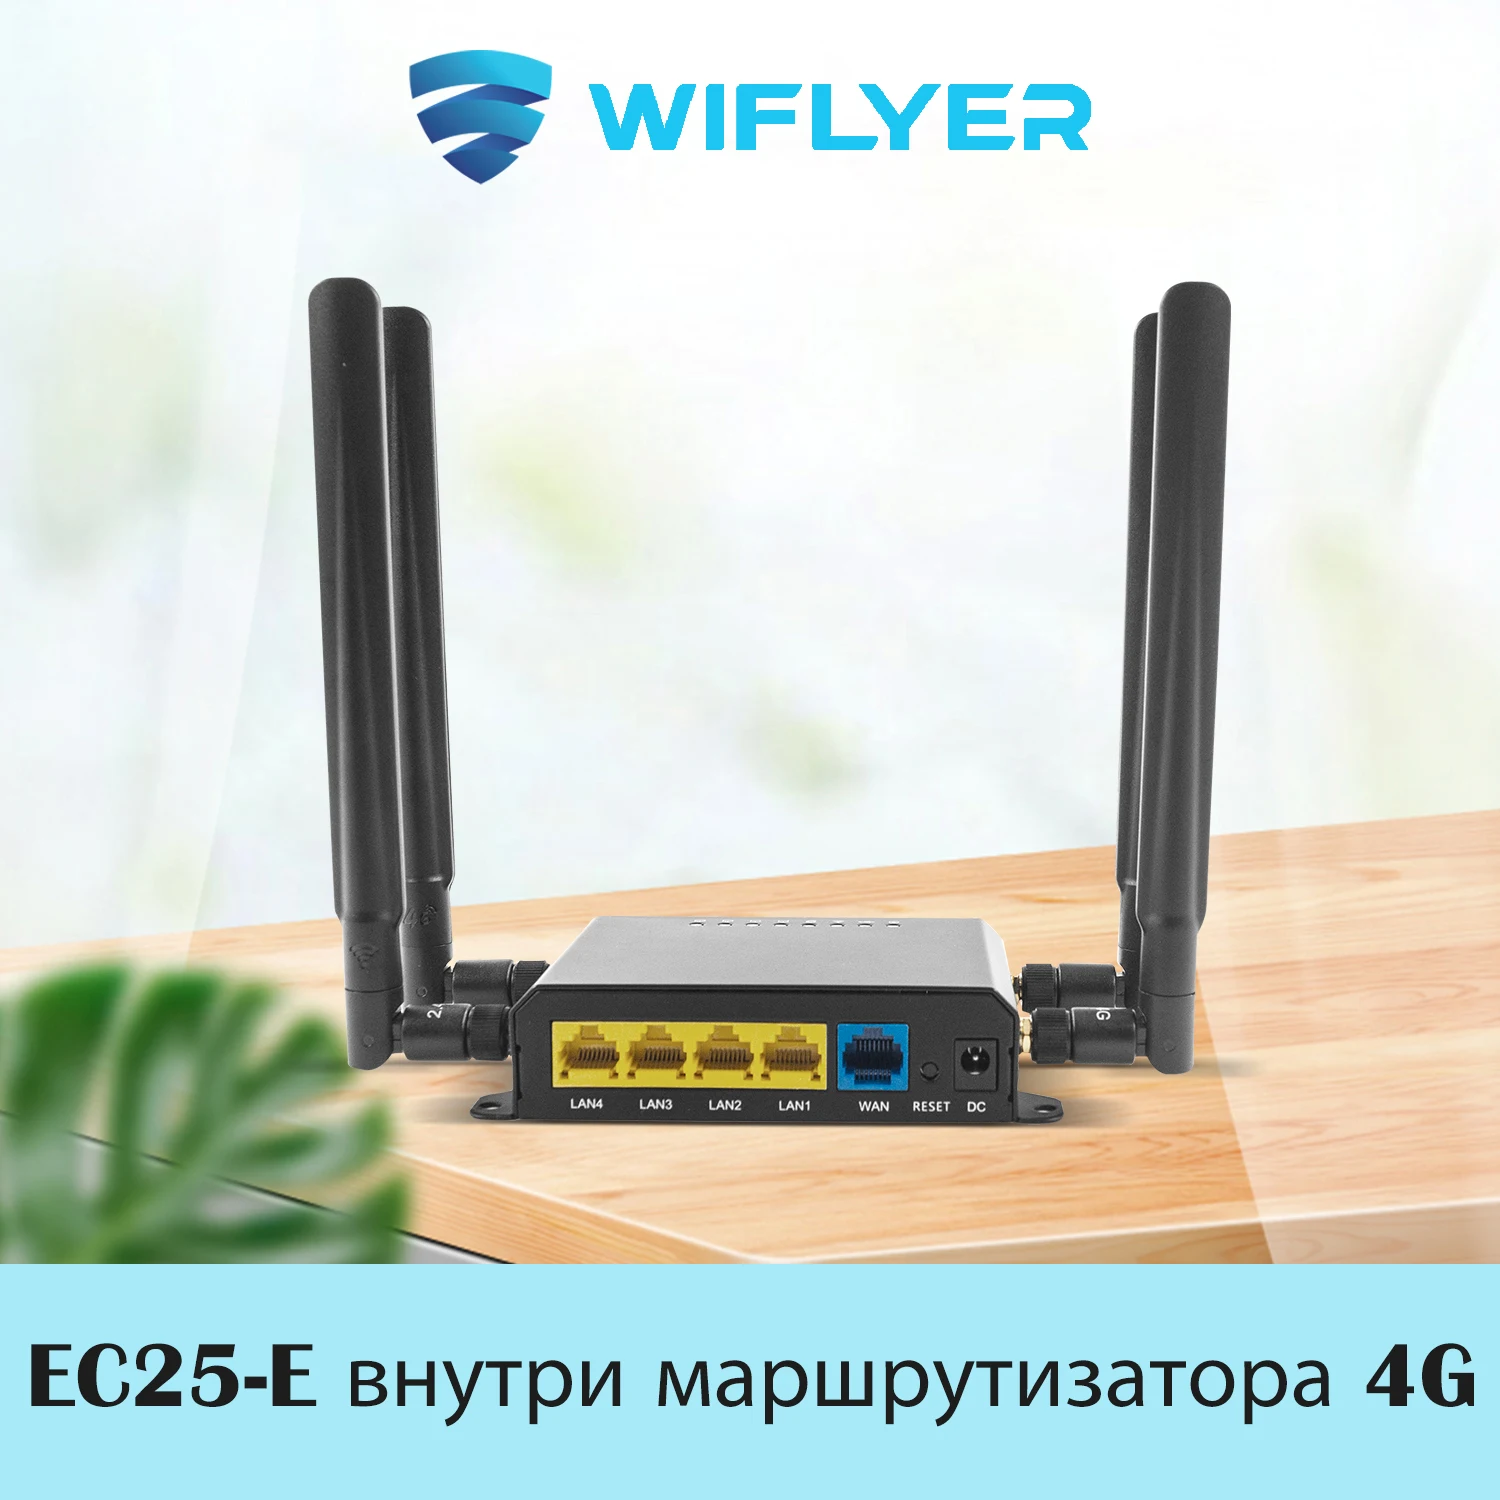 Wiflyer WE826-T2 4G WiFi Router EC25-E Modem SIM Card Slot for Home 4-LAN SD Port 300Mbps AP 2.4GHz Wireless for Russia